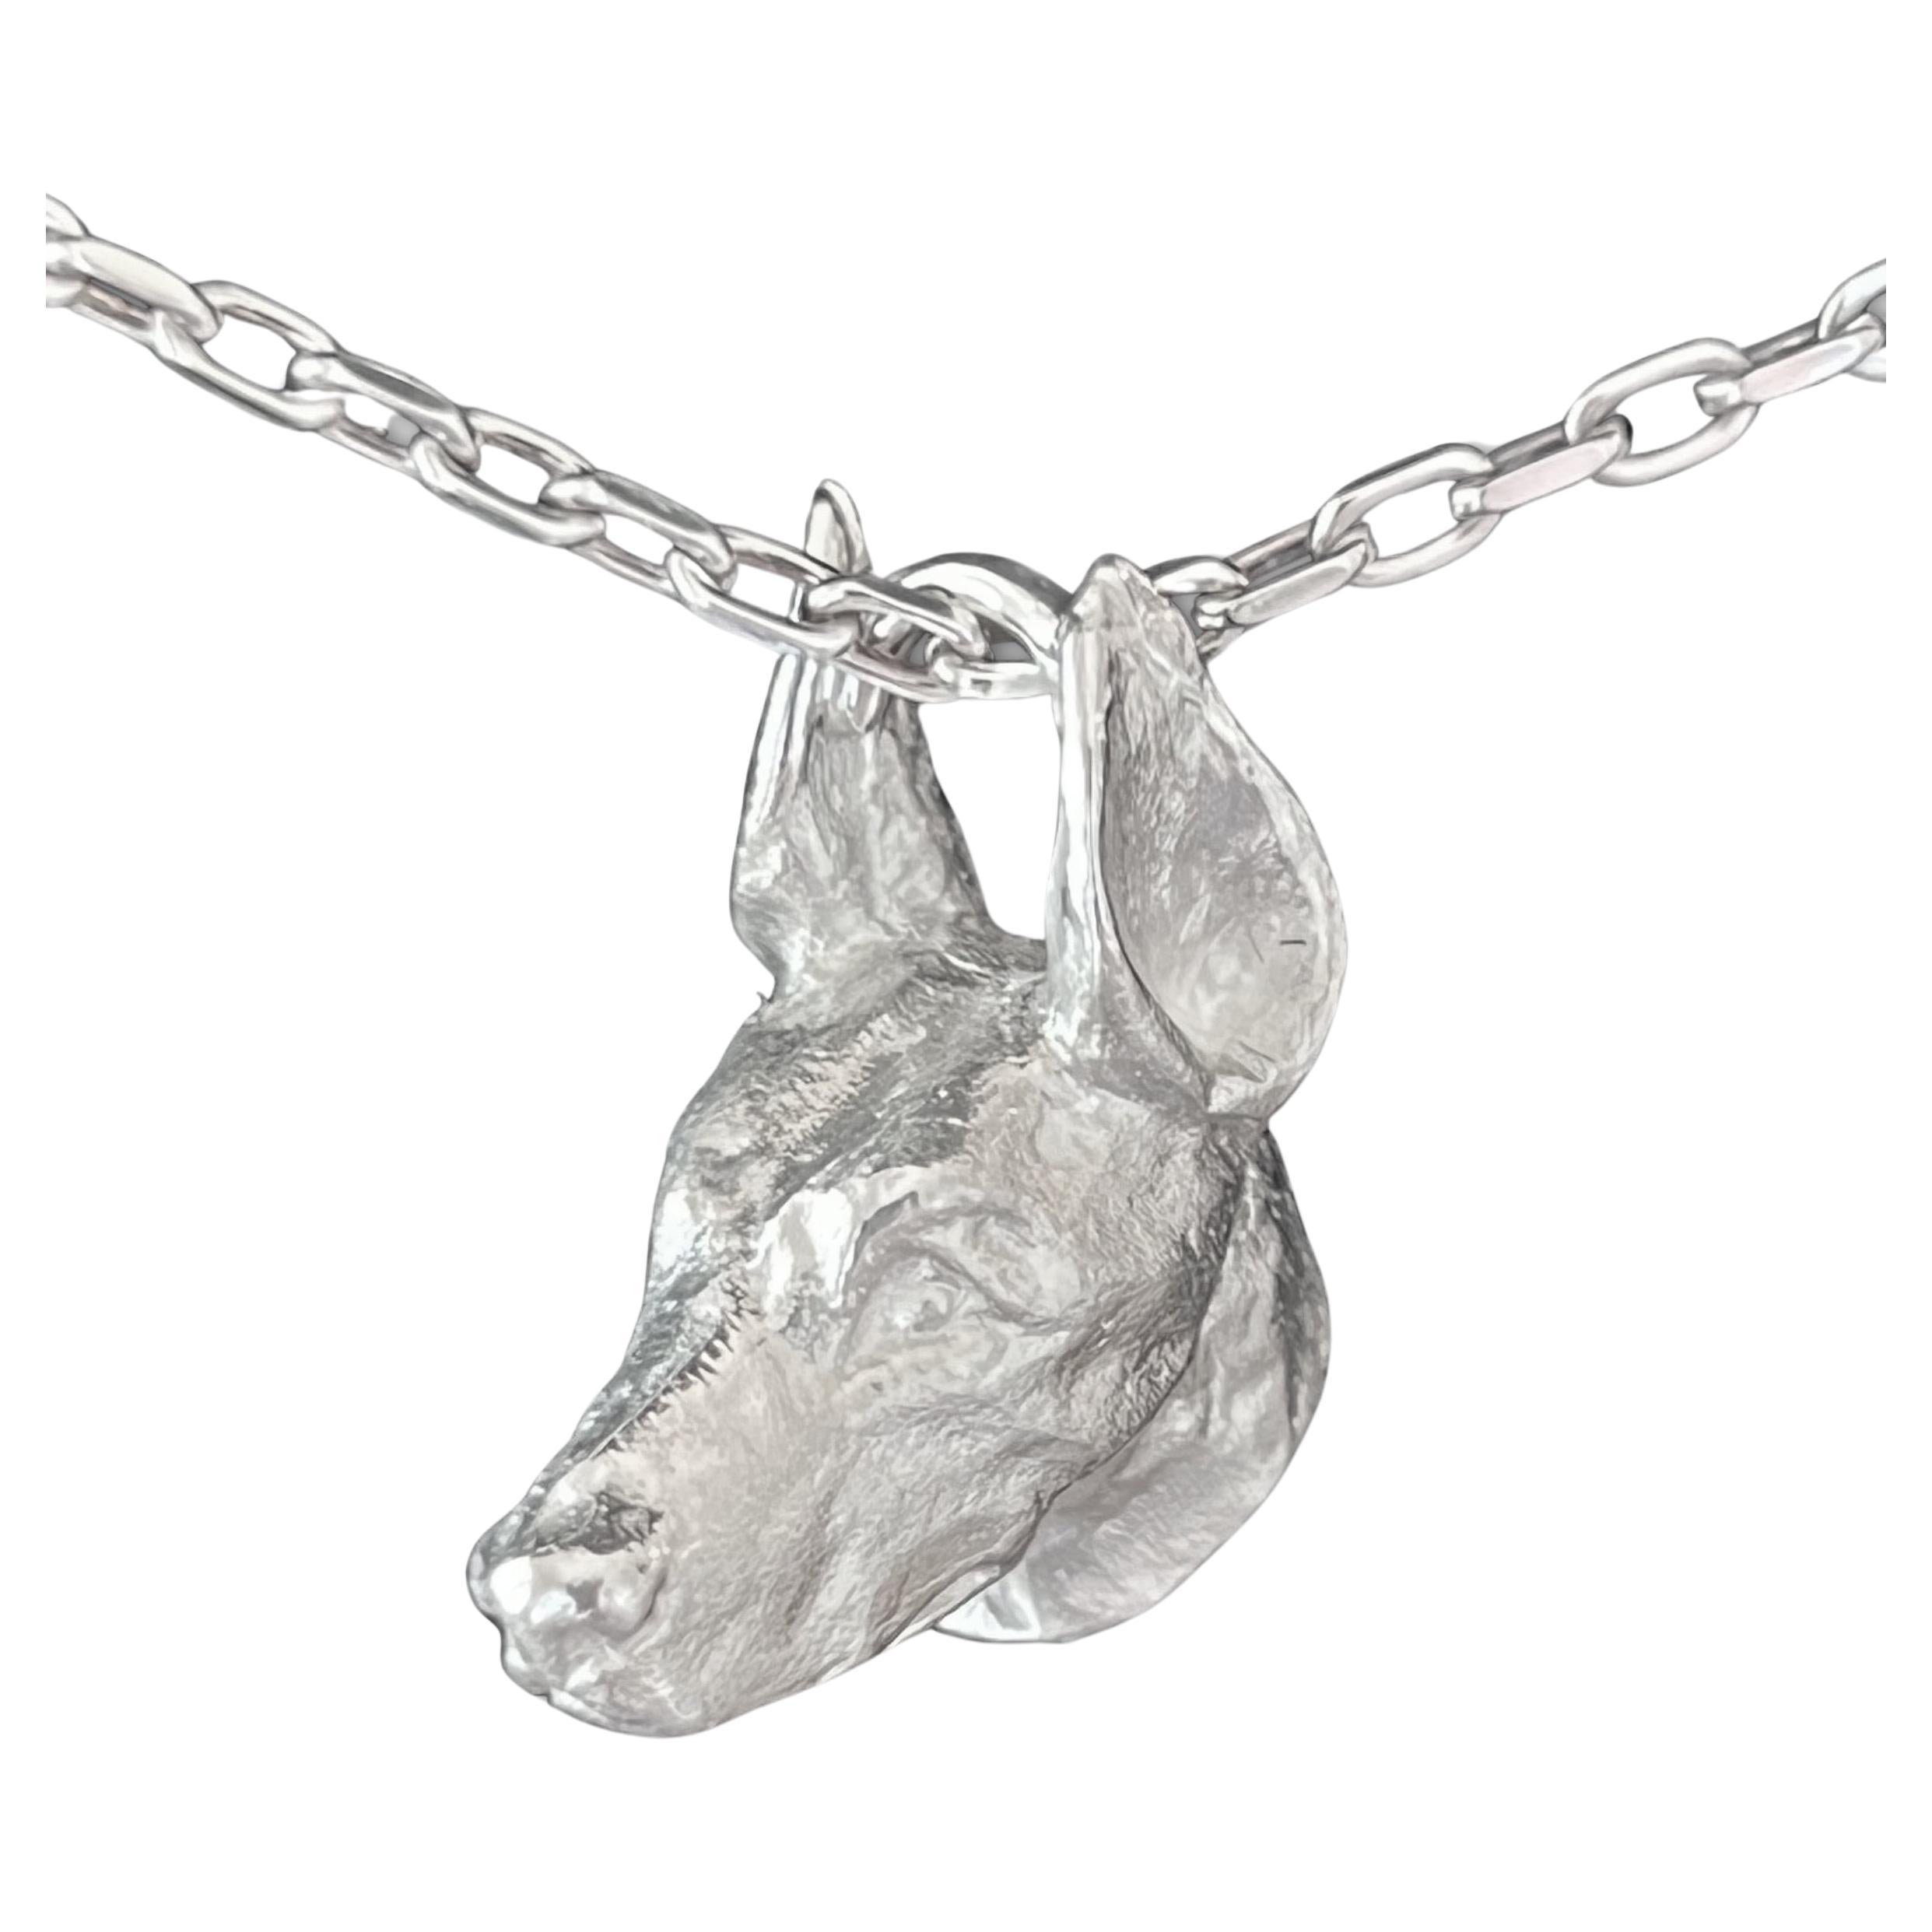 Paul Eaton Sculpted Doberman Dog Head in Sterling Silver Charm or Pendant 